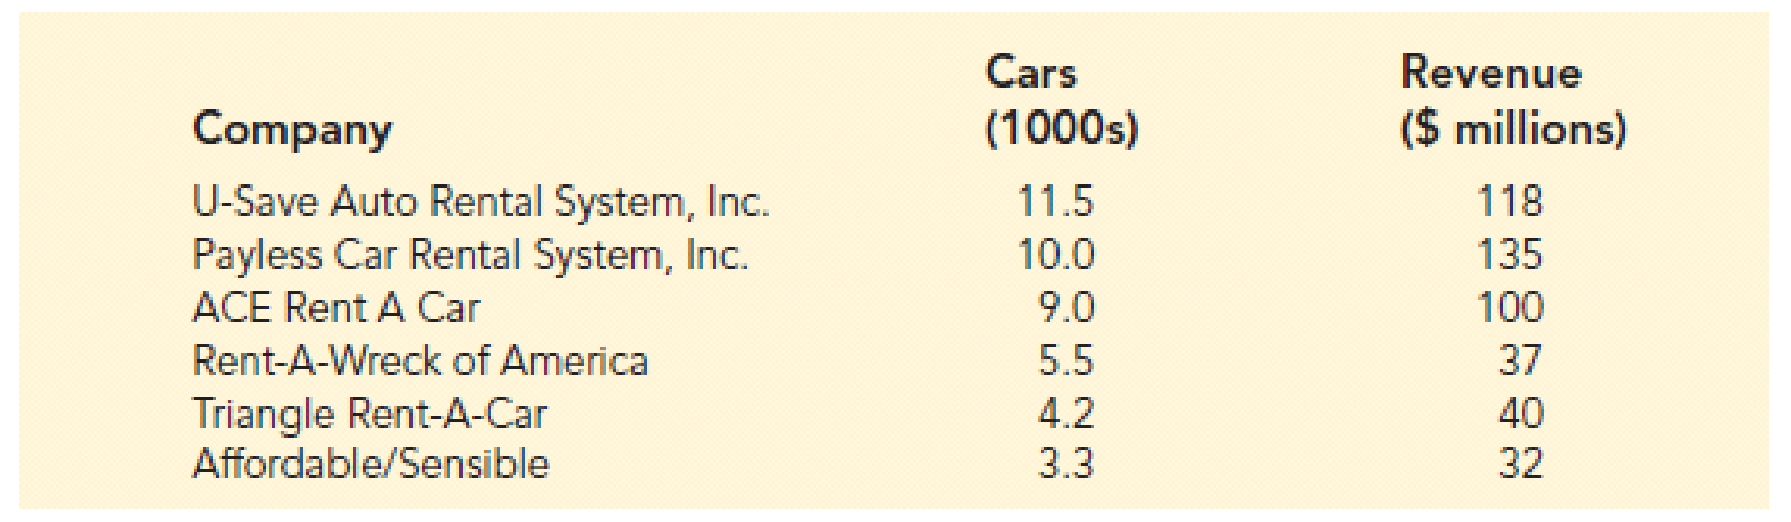 Significance of Fleet Size on Rental Car Revenue. Companies in the U.S